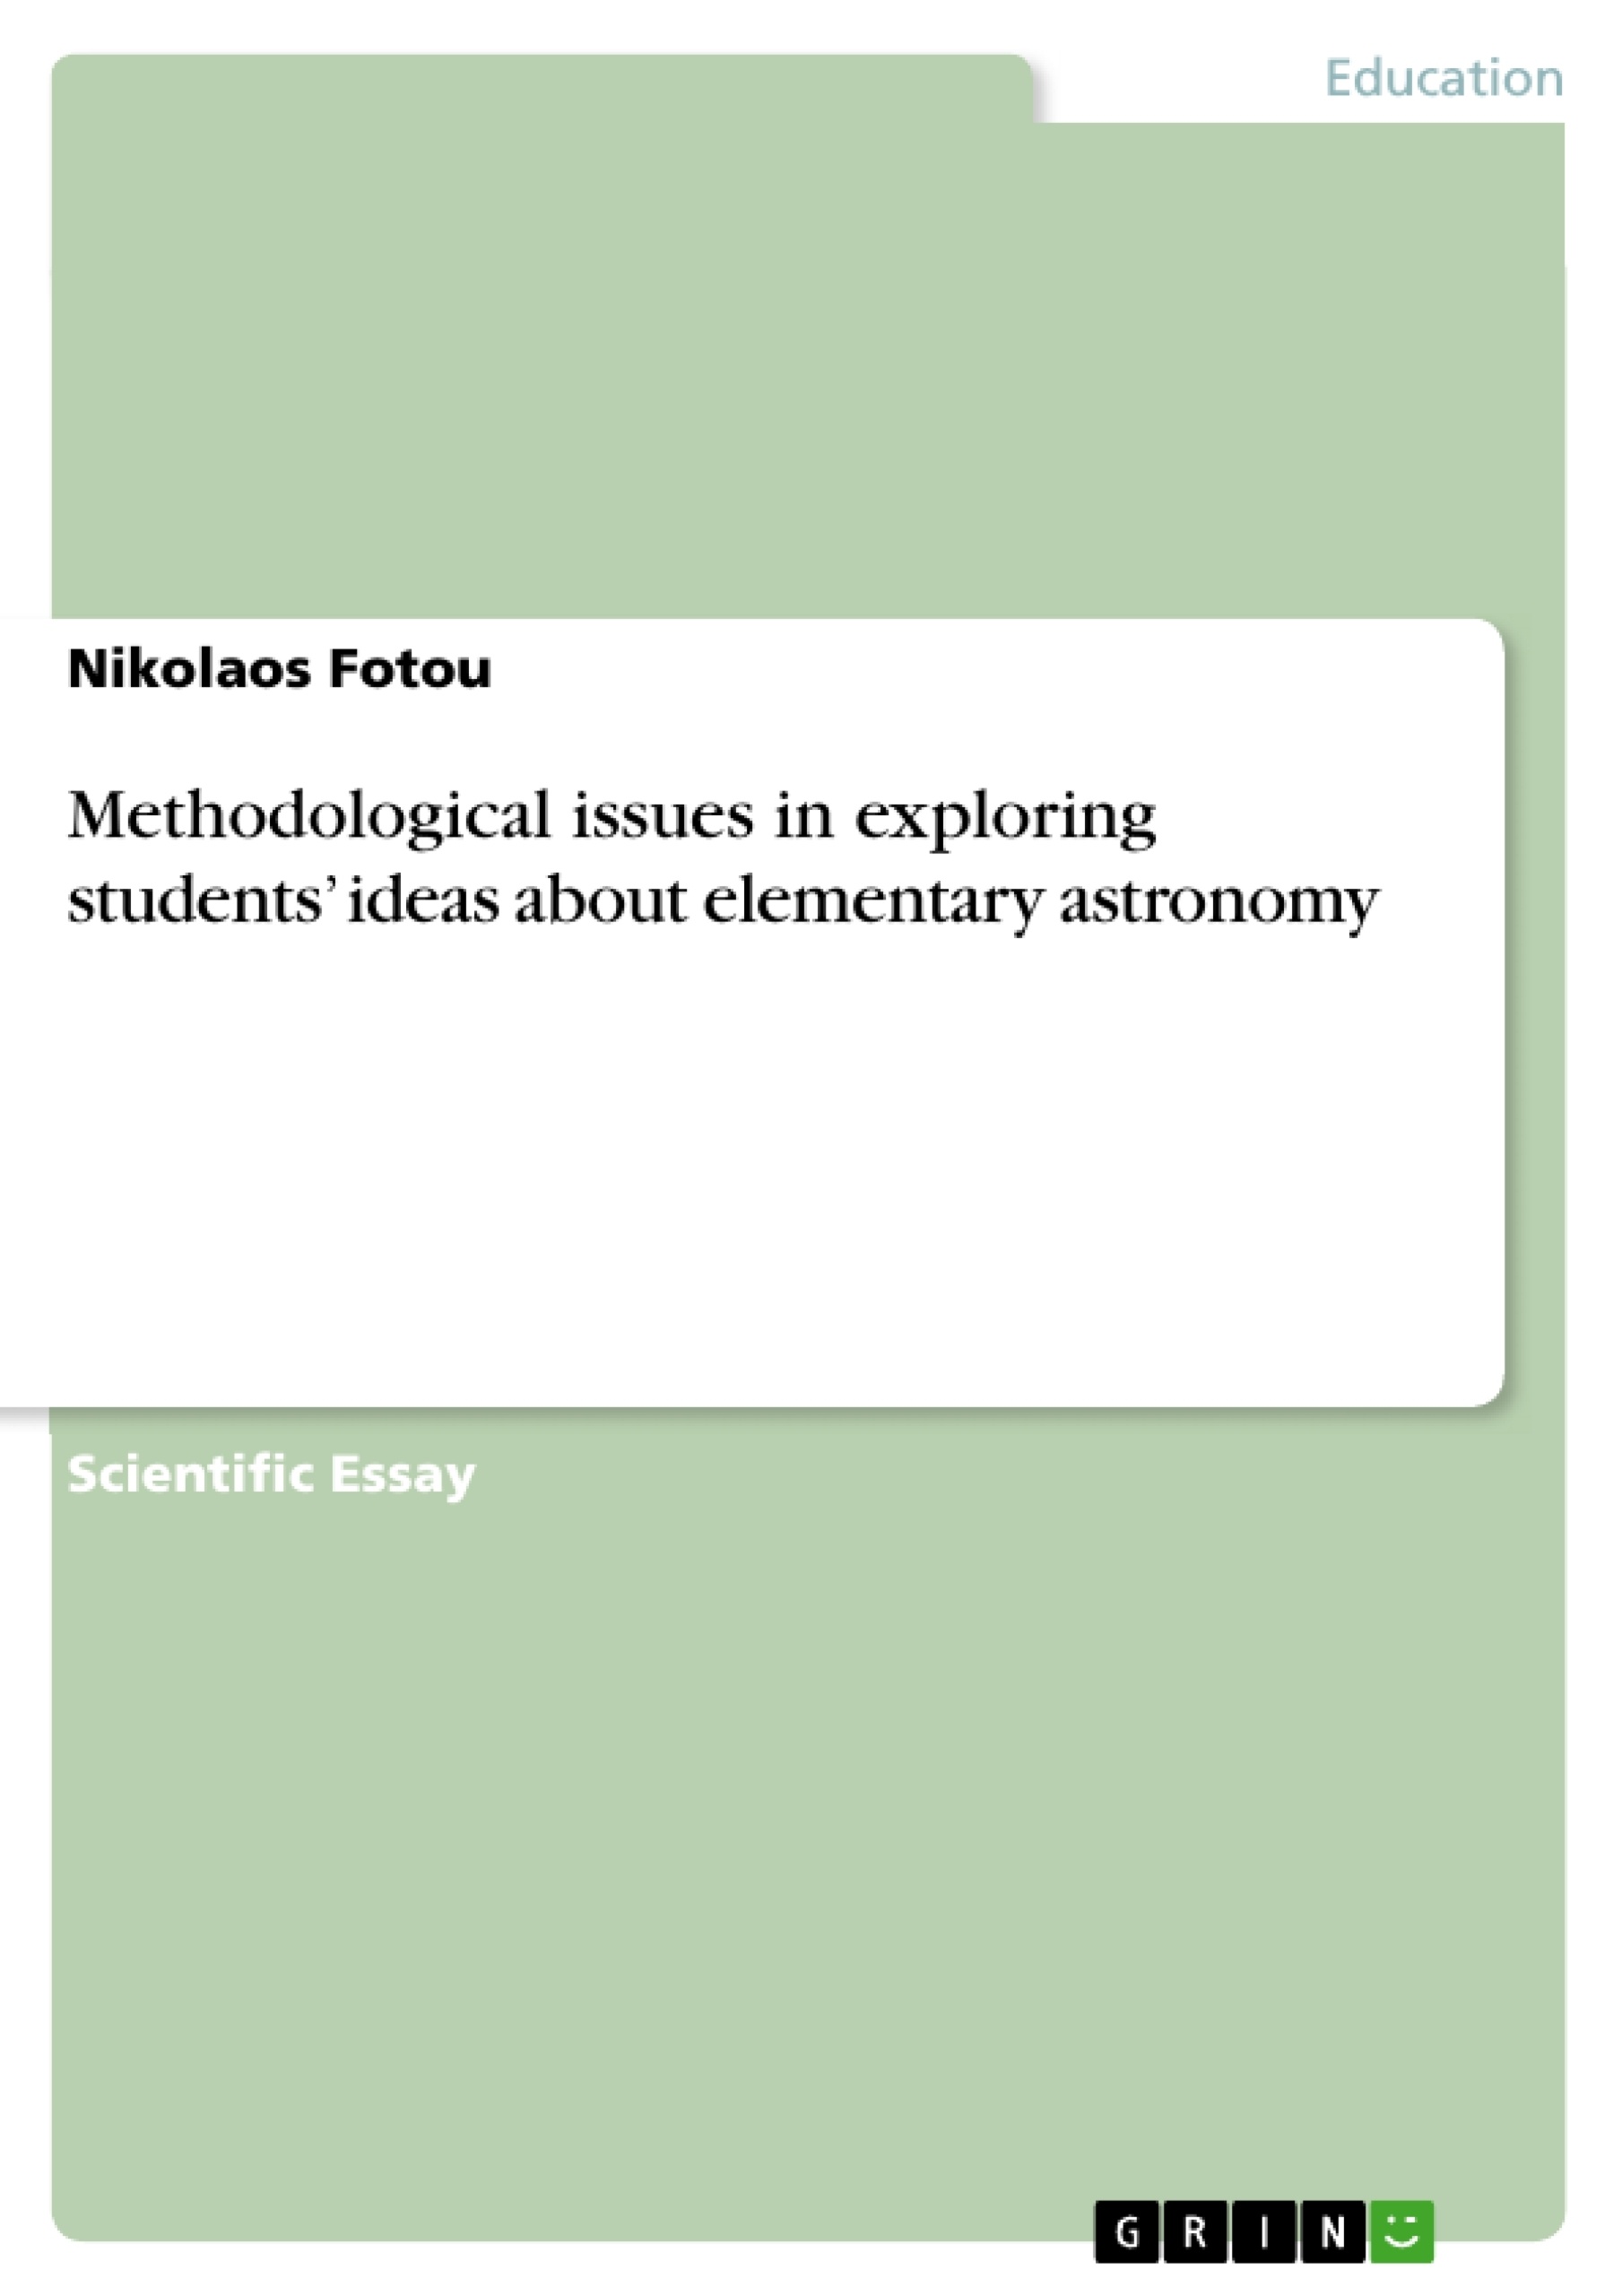 Titel: Methodological issues in exploring students’
ideas about elementary astronomy